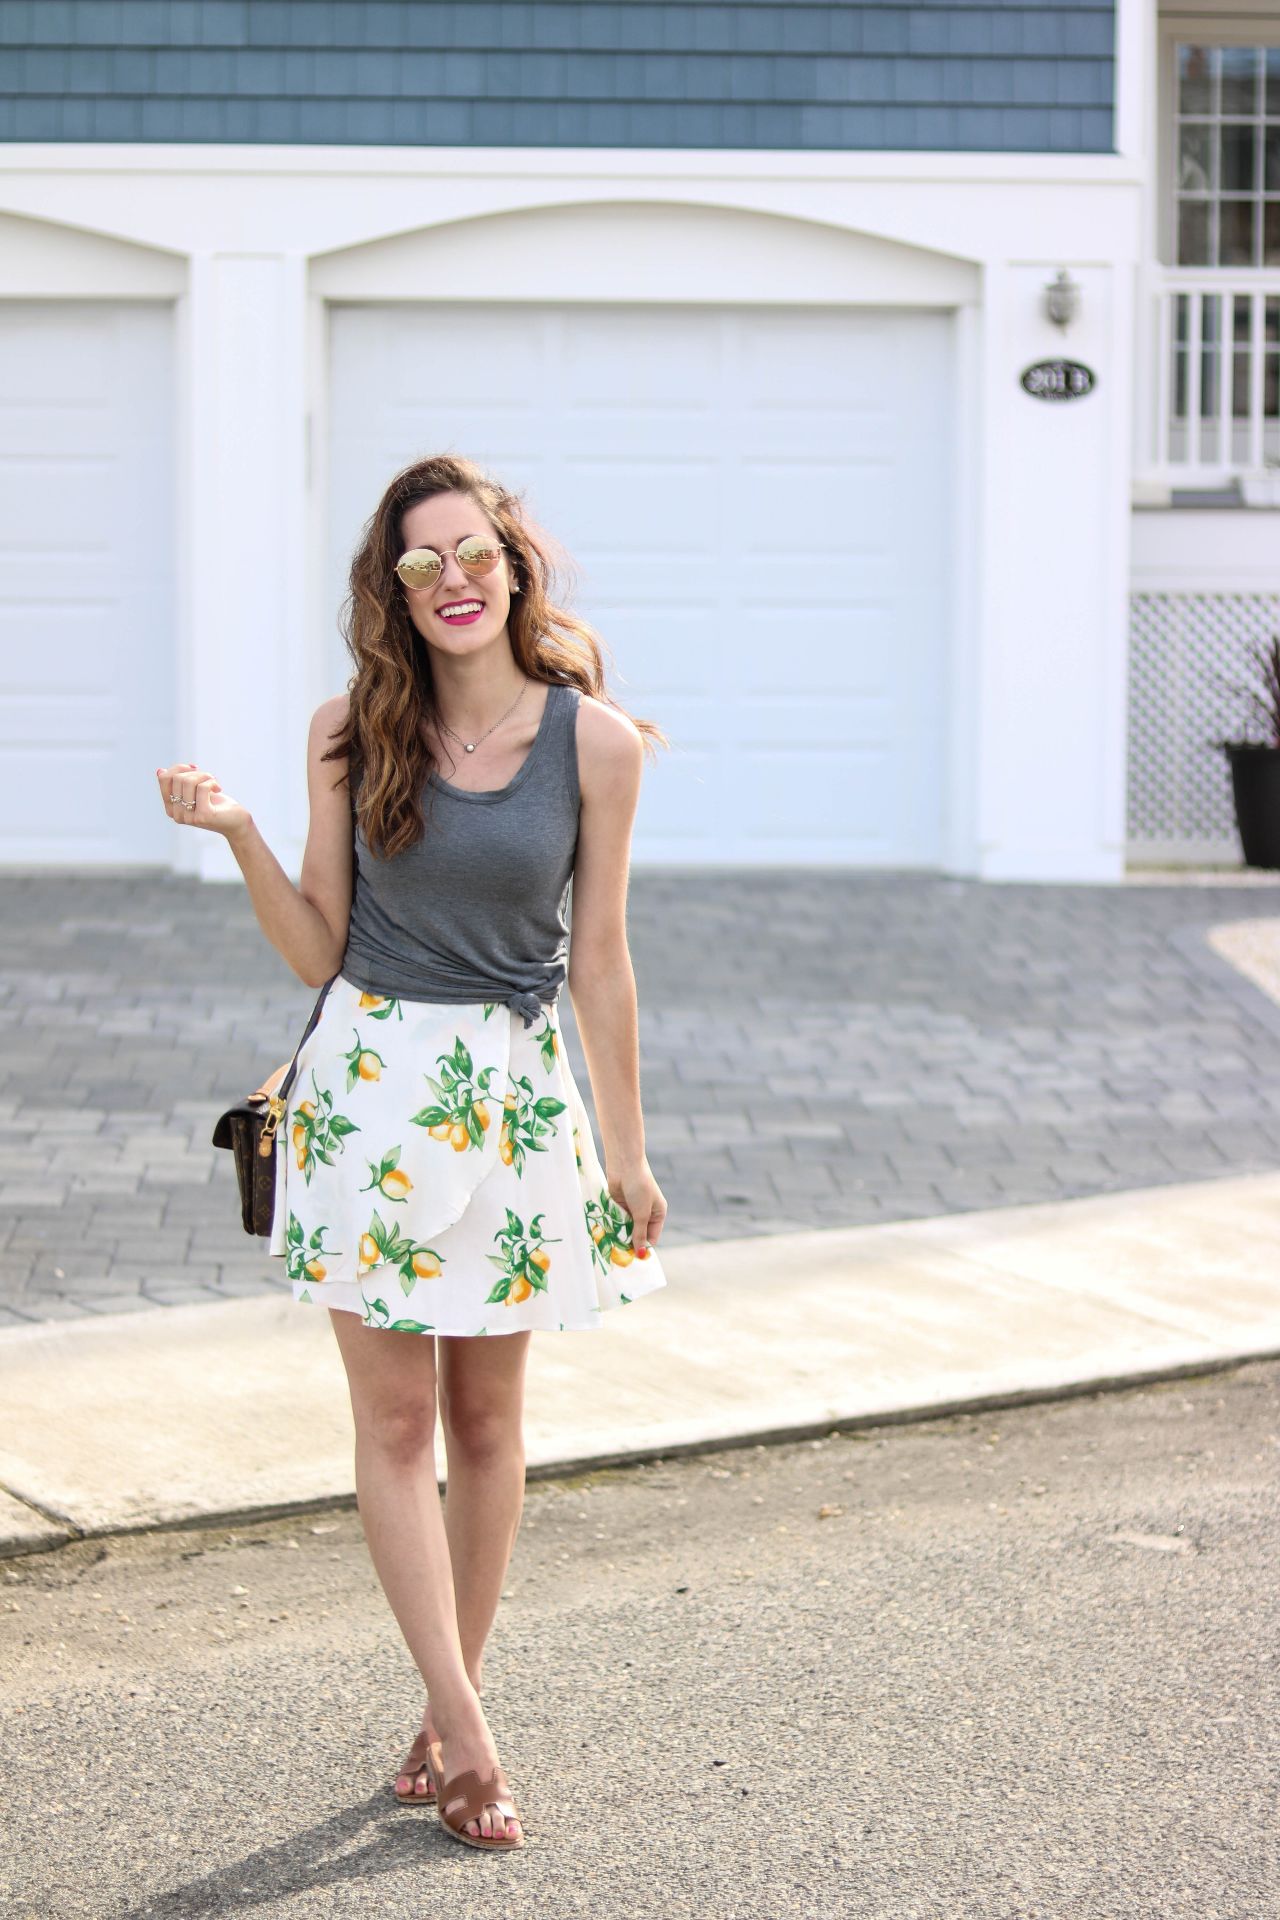 Feelin' fruity in this $20 lemon skirt, as seen on Philadelphia style blogger, Erica of Coming Up Roses. See how she styled it and shop the lemon skirt while shopping other fruit-themed pieces for summer!